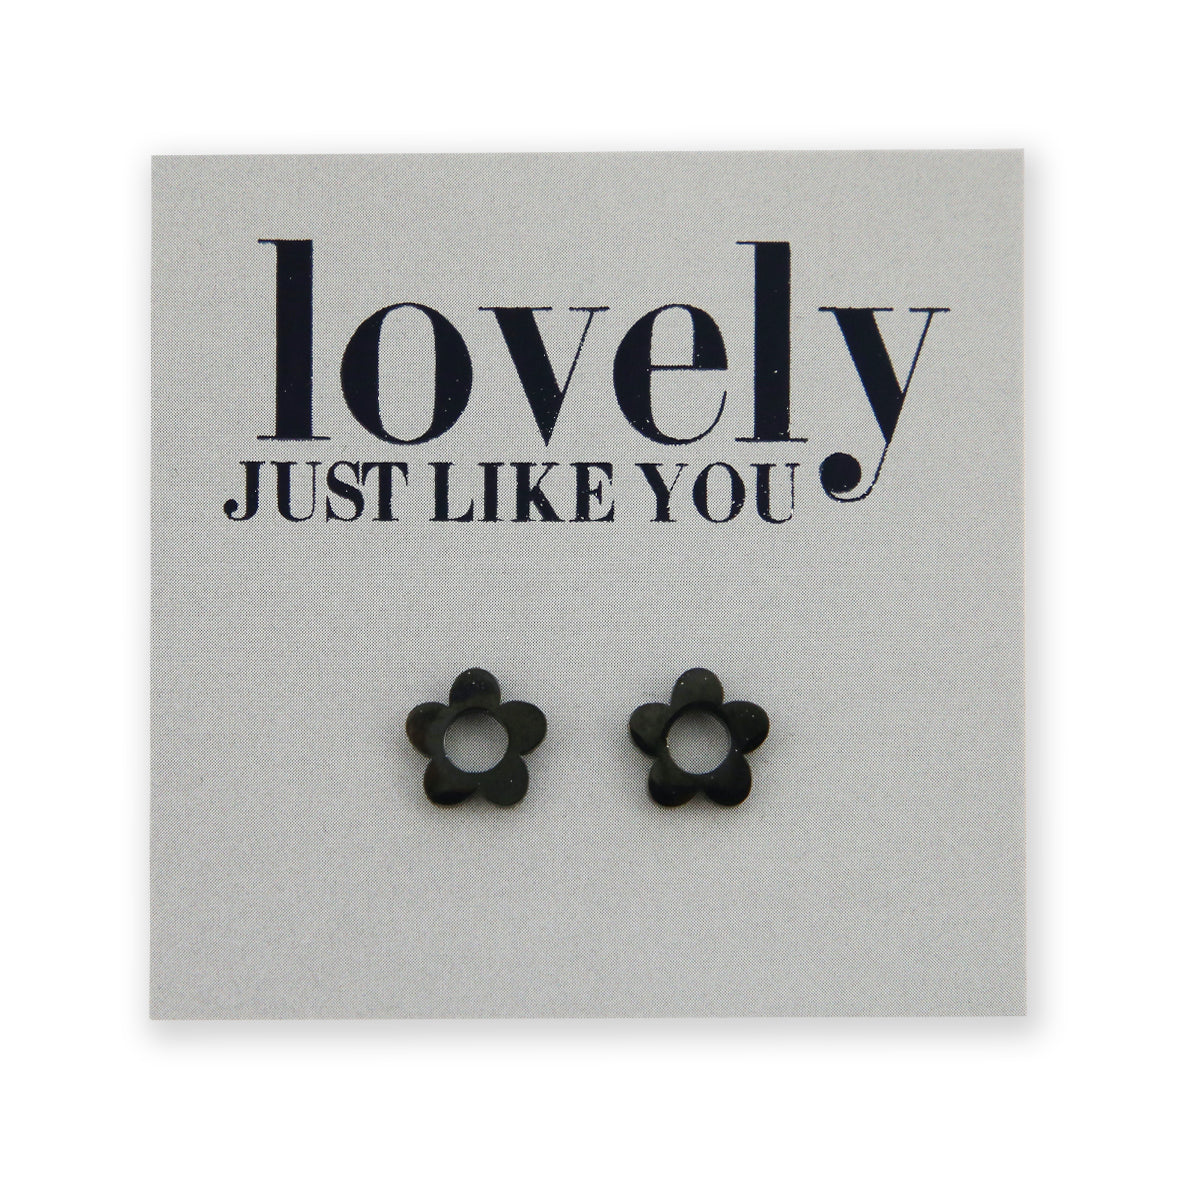 Stainless Steel Earring Studs - Lovely Just Like You - FLOWER BUDS